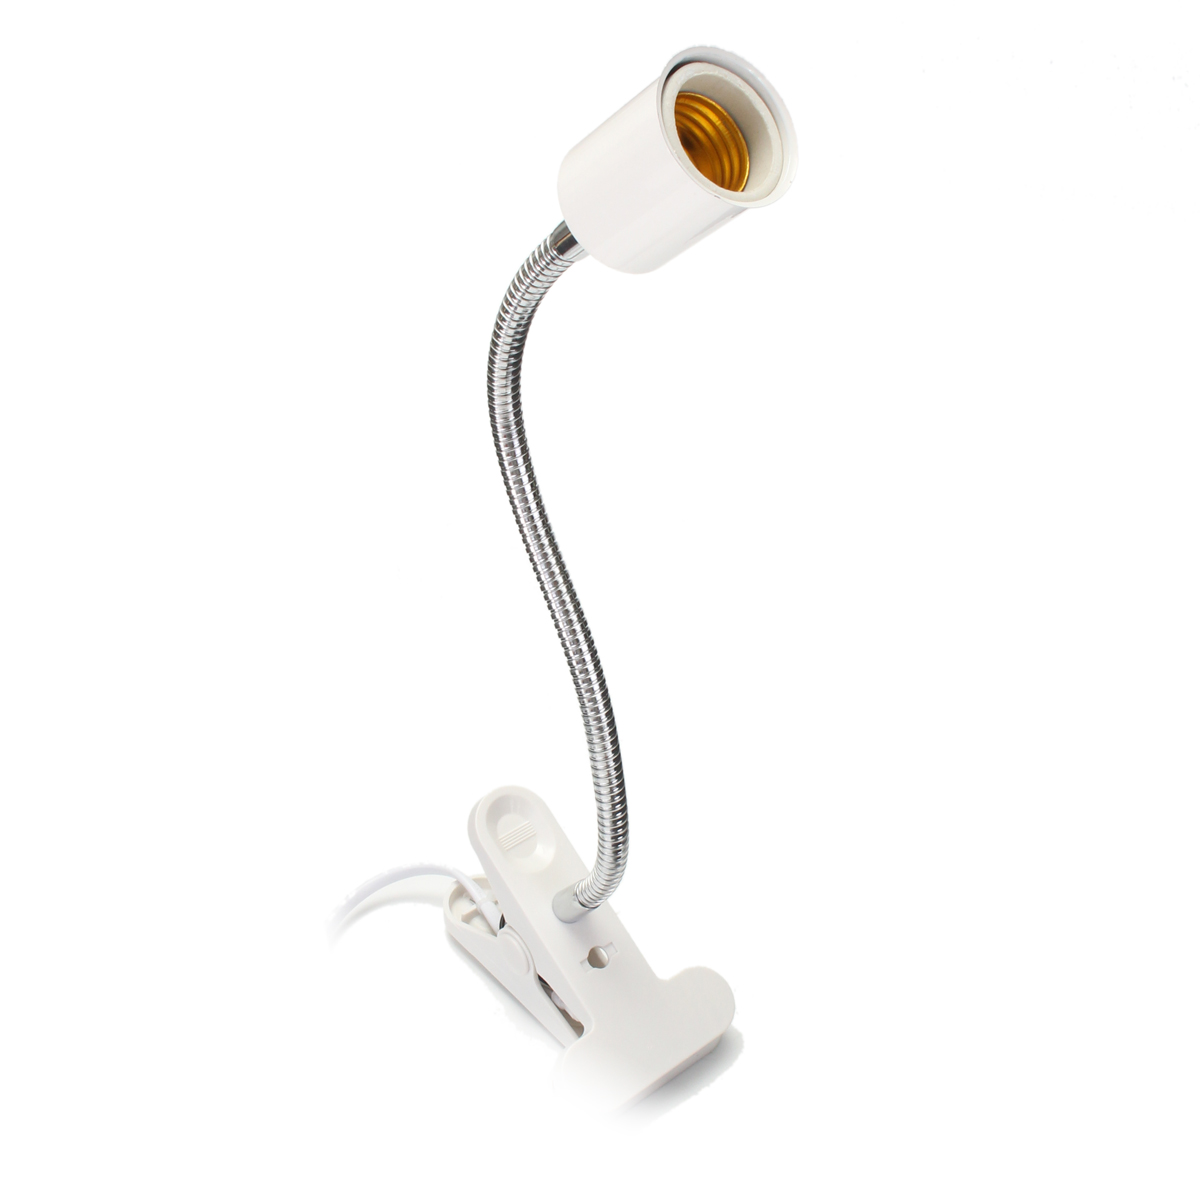 30CM-E27-Flexible-Pet-Heat-LED-Light-Bulb-Adapter-Lamp-Holder-Socket-with-Clip-On-Off-Switch-1309544